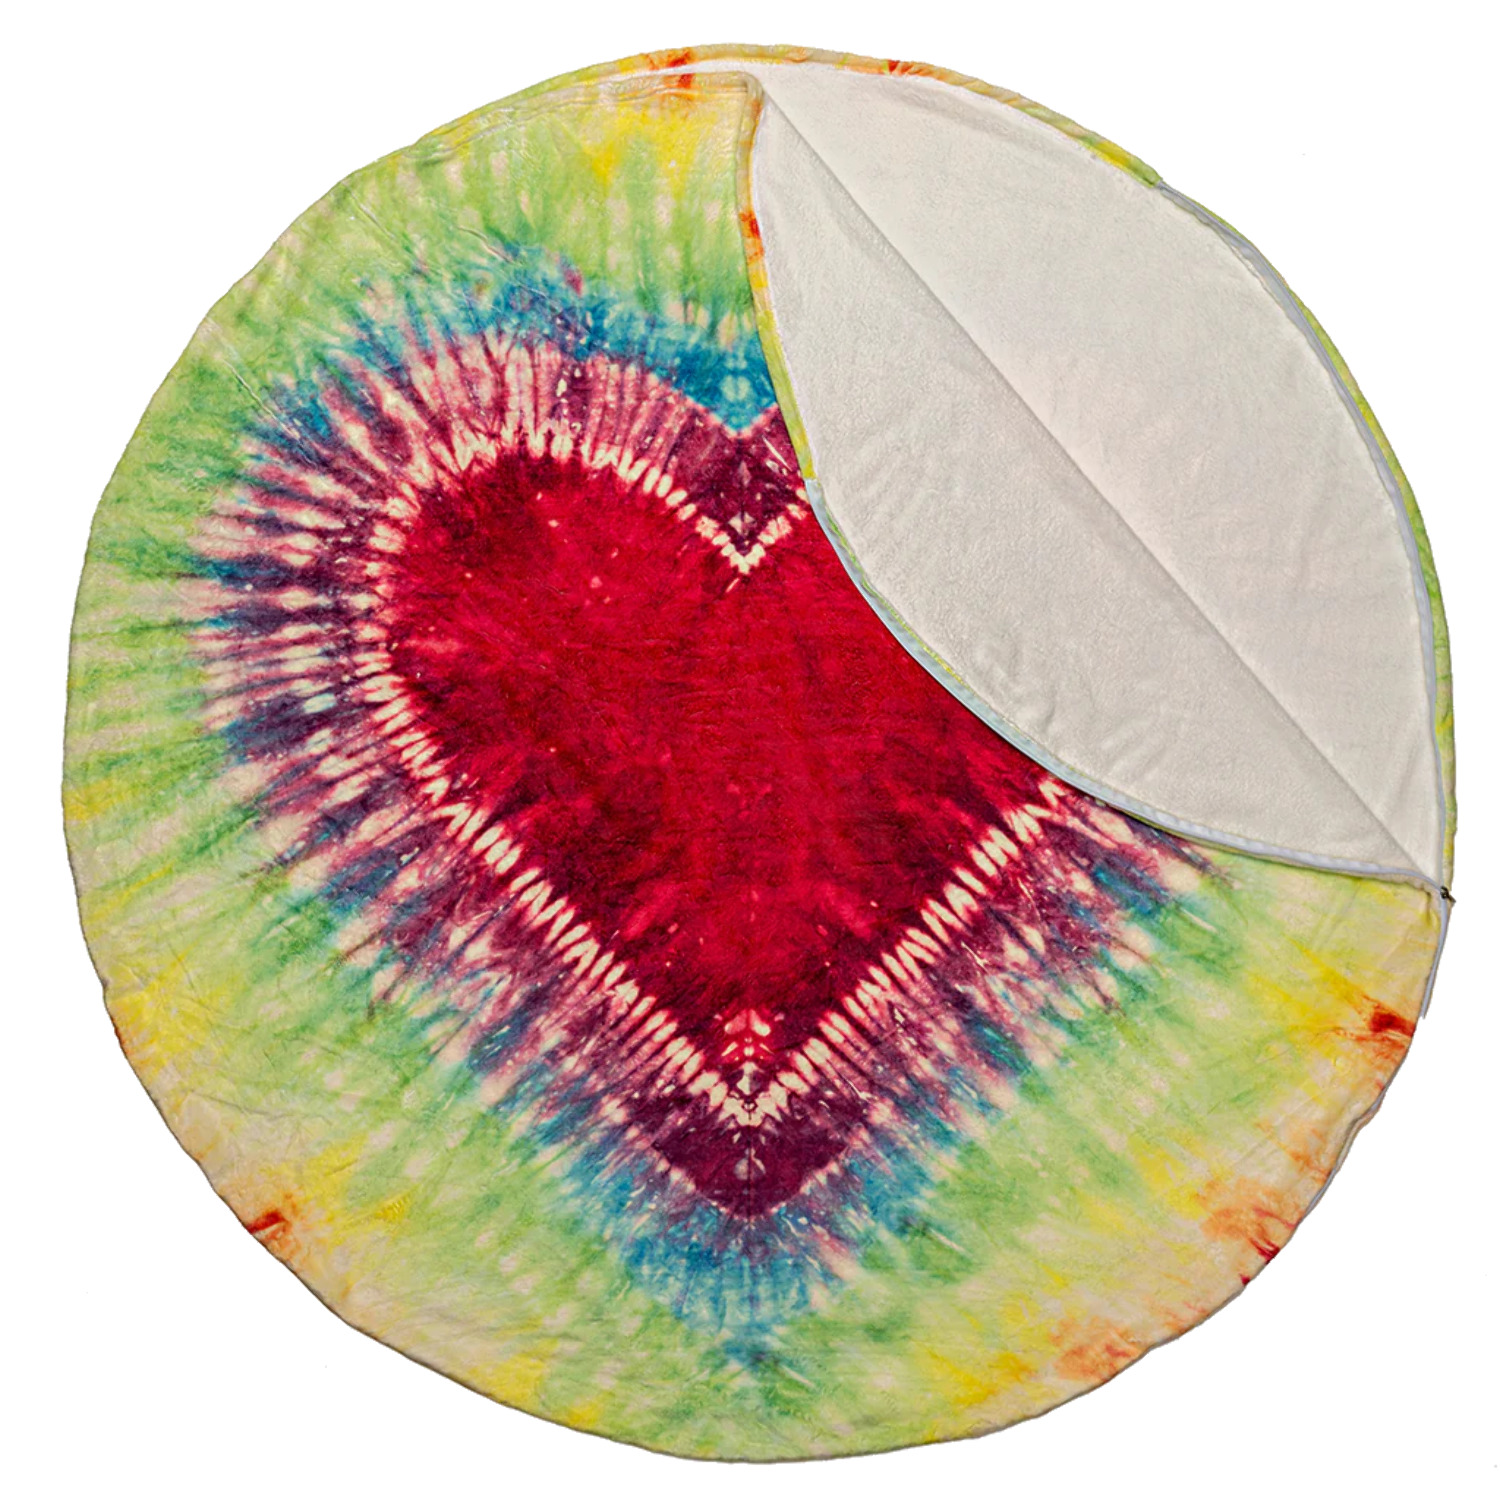 Heart Tie Dye Round Sleeping Bag Blanket 60" Diameter - Cozy Warm Flannel - Novelty Circle Throw Blanket Unique & Fun Love Blanket - Perfect for Kids, Perfect for Birthday Gift - image 1 of 5